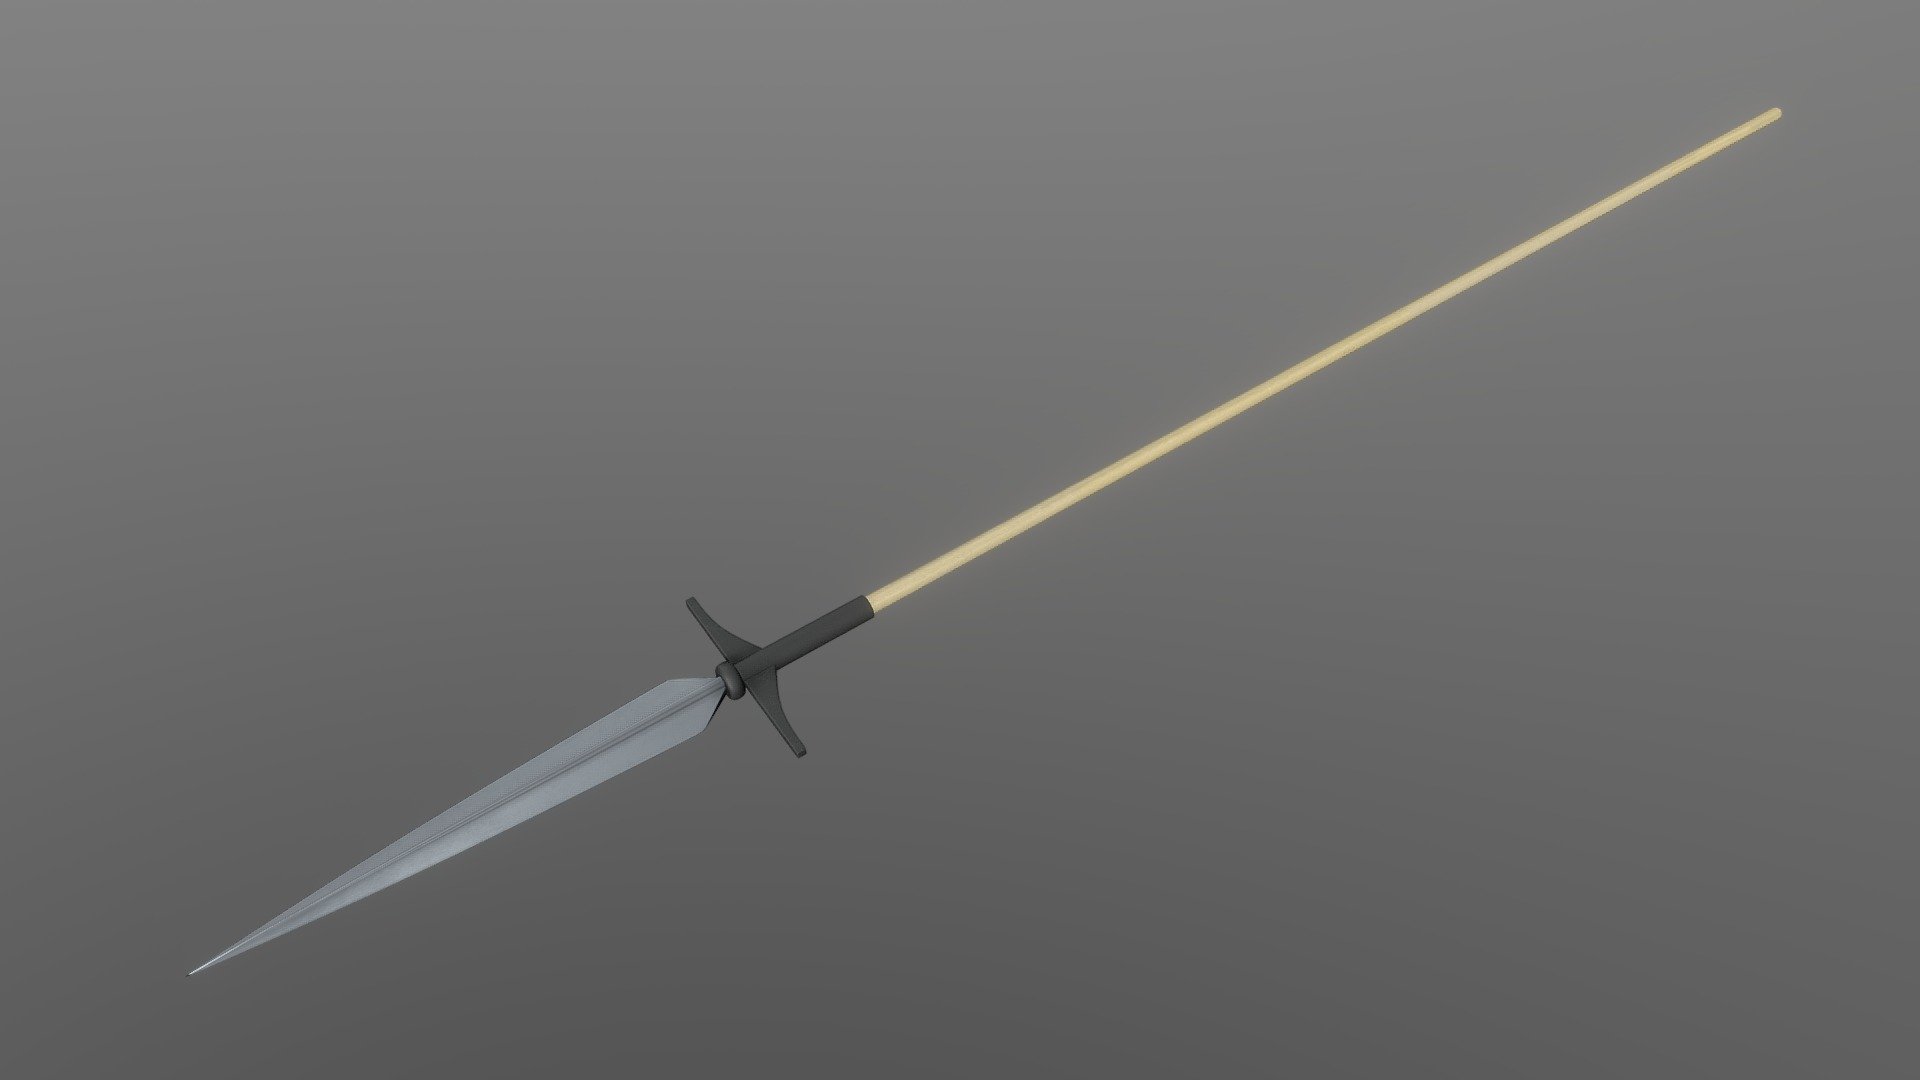 Boar Spear A
Bring your project to life with this low poly 3D model of an Boar Spear. Perfect for use in games, animations, VR, AR, and more, this model is optimized for performance and still retains a high level of detail.


Features



Low poly design with 2,532 vertices

4,994 edges

2,468 faces (polygons)

4,936 tris

2k PBR Textures and materials

File formats included: .obj, .fbx, .dae, .stl


Tools Used
This Boar Spear low poly 3D model was created using Blender 3.3.1, a popular and versatile 3D creation software.


Availability
This low poly Boar Spear 3D model is ready for use and available for purchase. Bring your project to the next level with this high-quality and optimized model 3d model